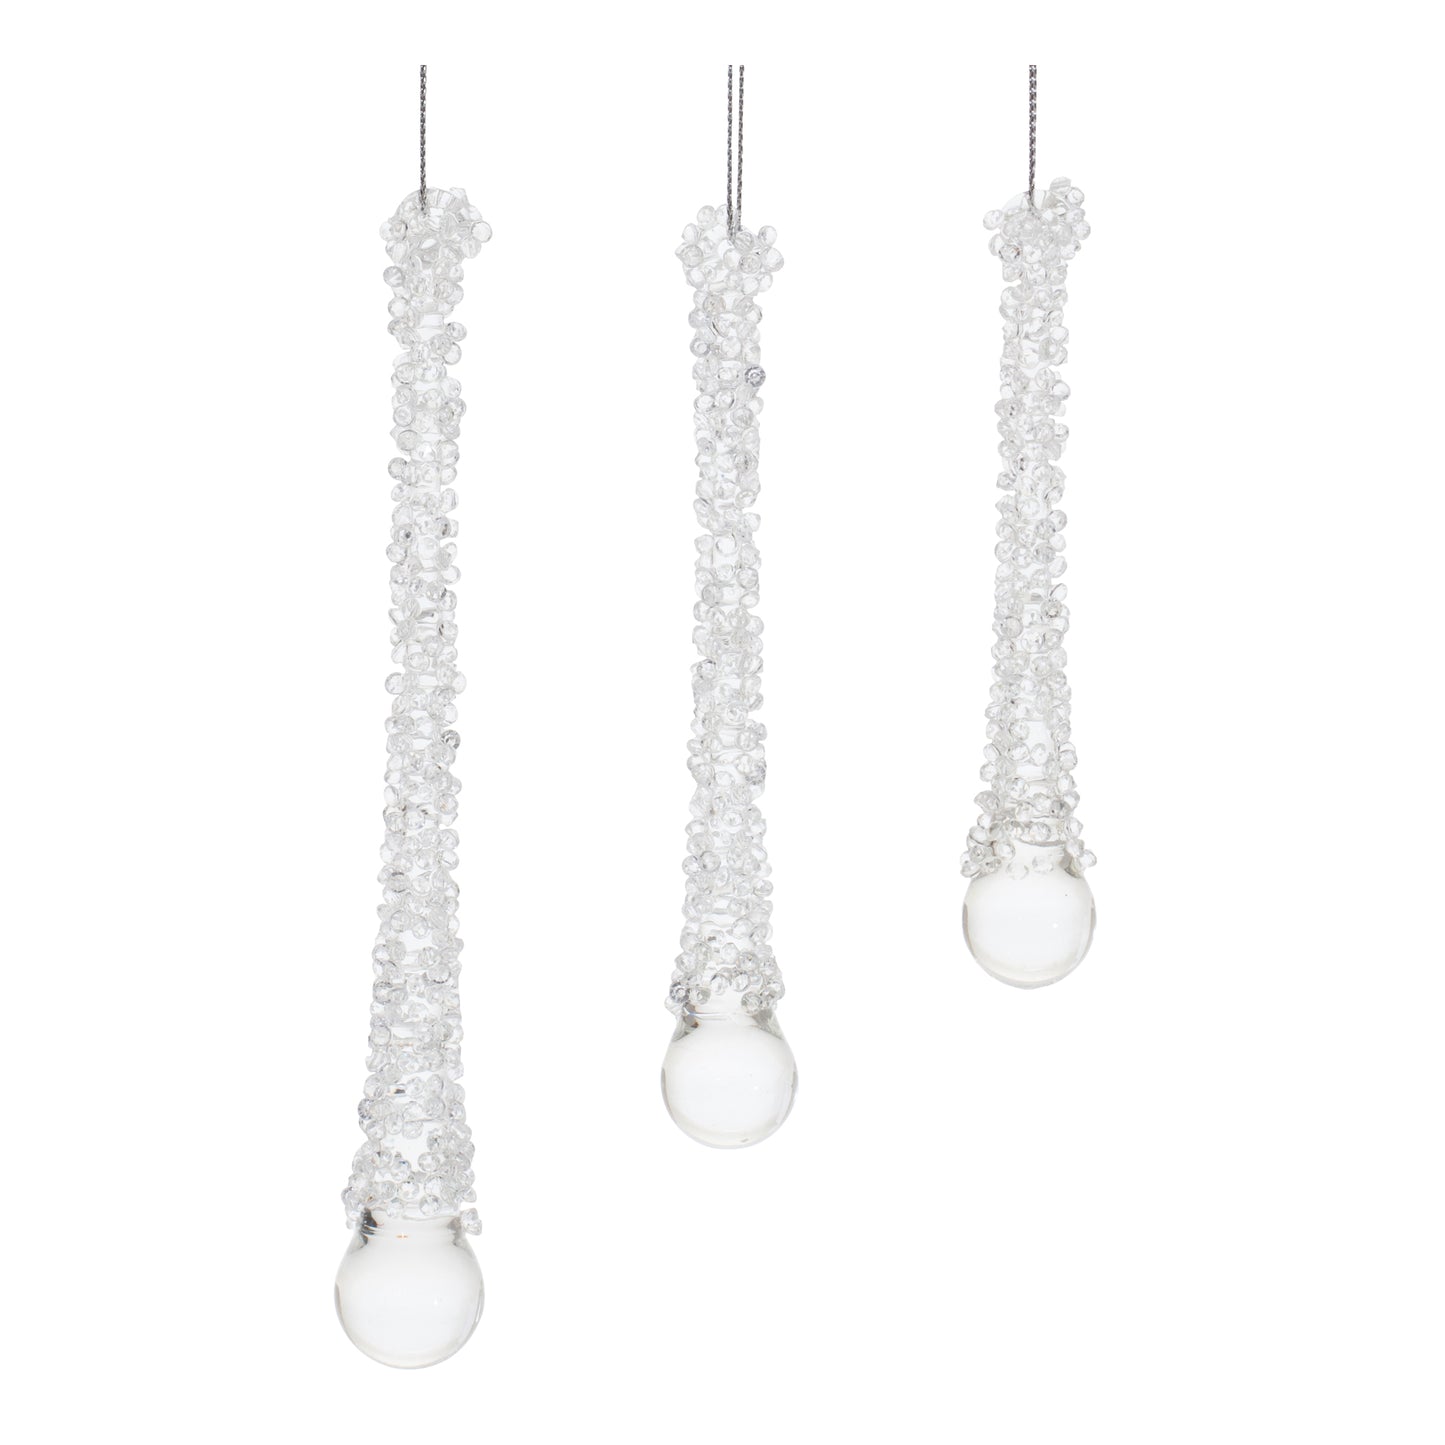 4.25"H, 5"H, or 6.25"H Chunky Shimmer Icicle Glass Ornament